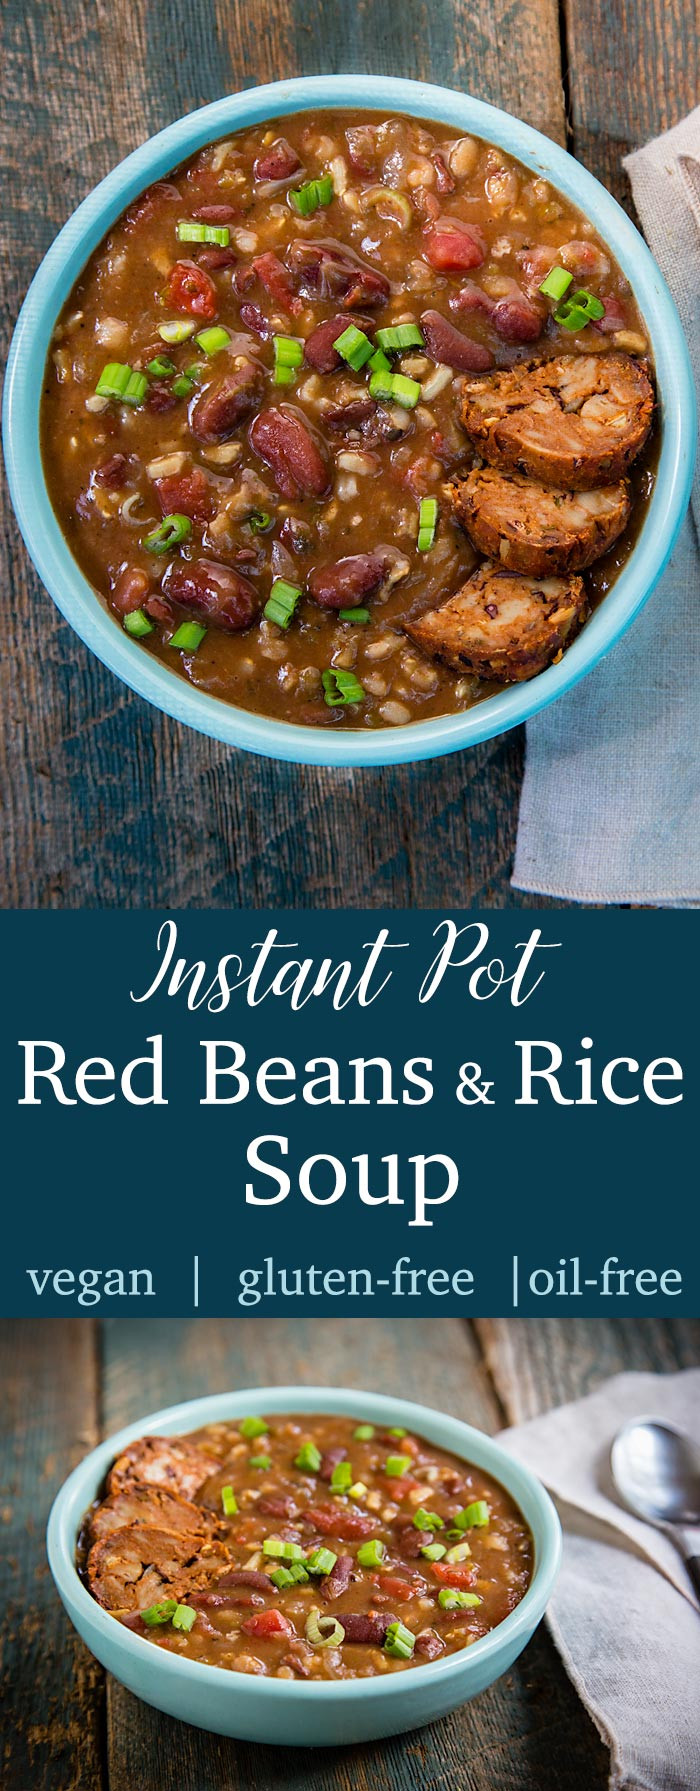 Instant Pot Low Fat Recipes
 Instant Pot Red Beans and Rice Soup